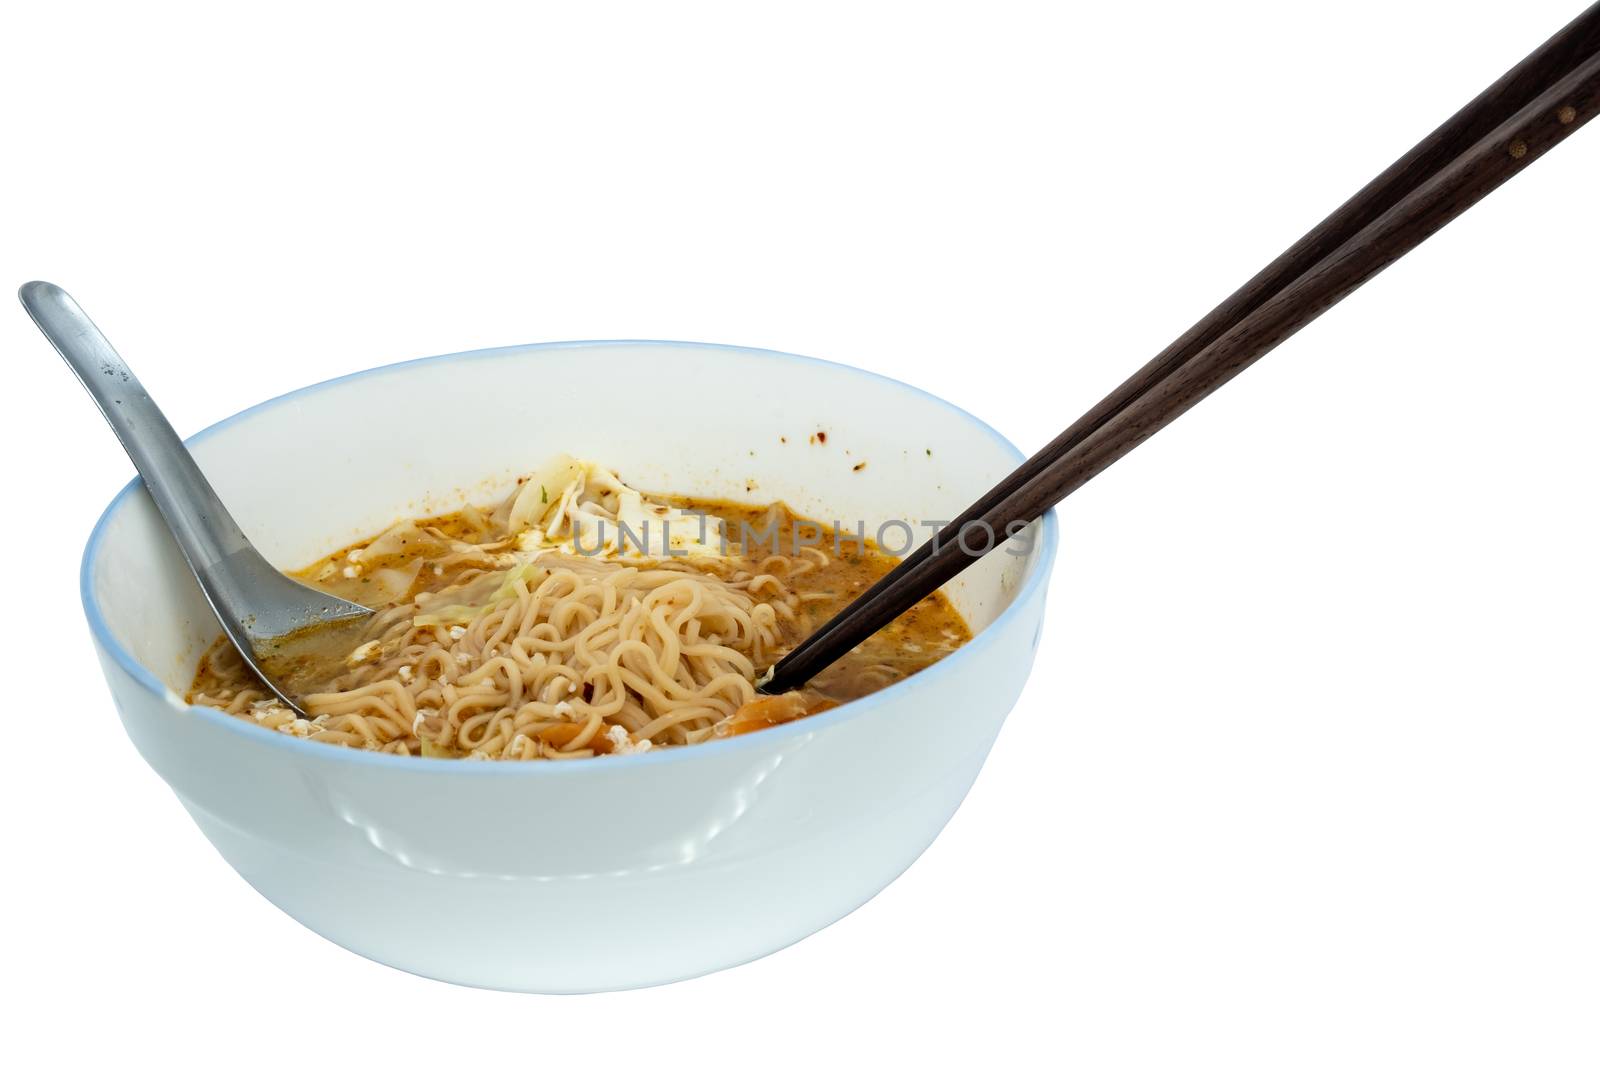 The Instant noodle with spoon and chopsticks in a white ceramic bowl isolated on white.